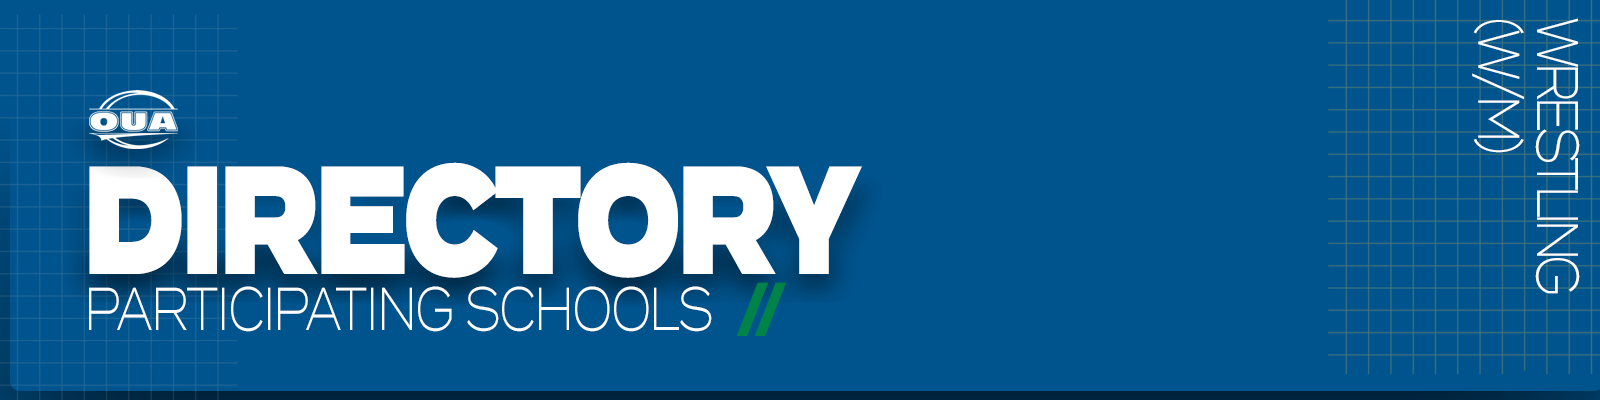 Predominantly blue graphic with large white text on the left side that reads 'Directory, Participating Schools' and small white vertical text on the right side that reads 'Wrestling'